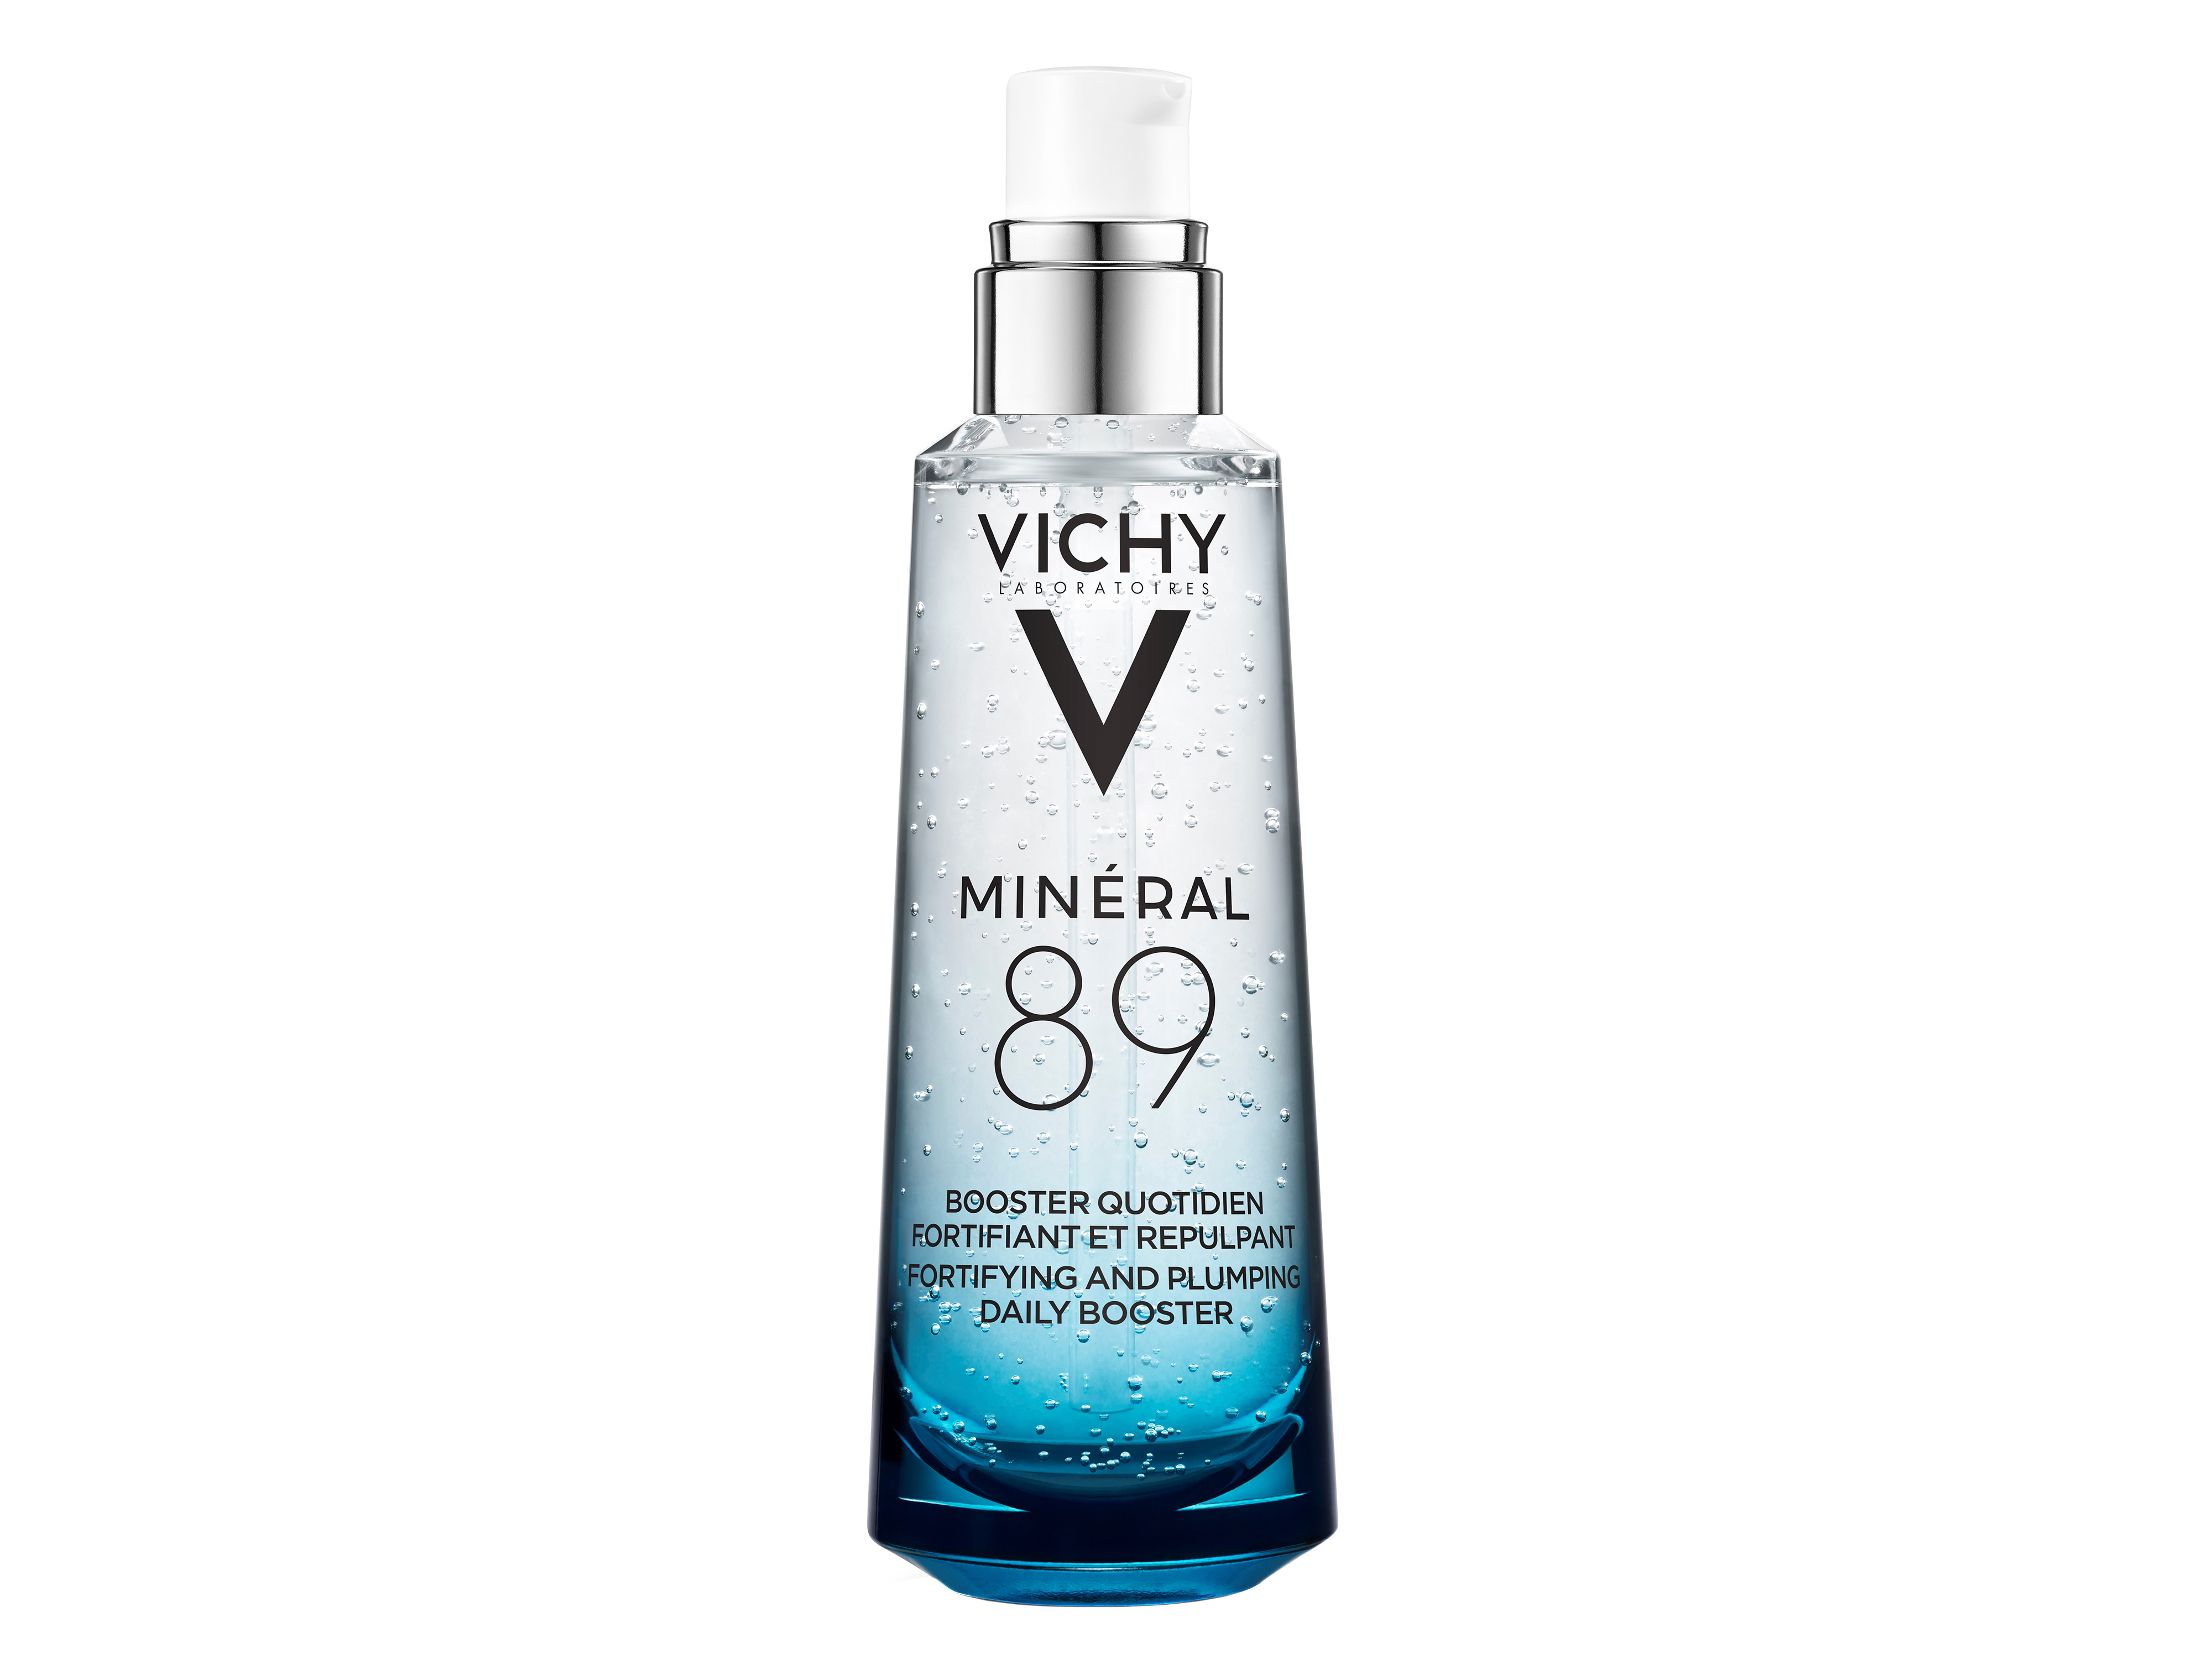 Vichy Vichy Mineral 89 Booster Large, 75 ml